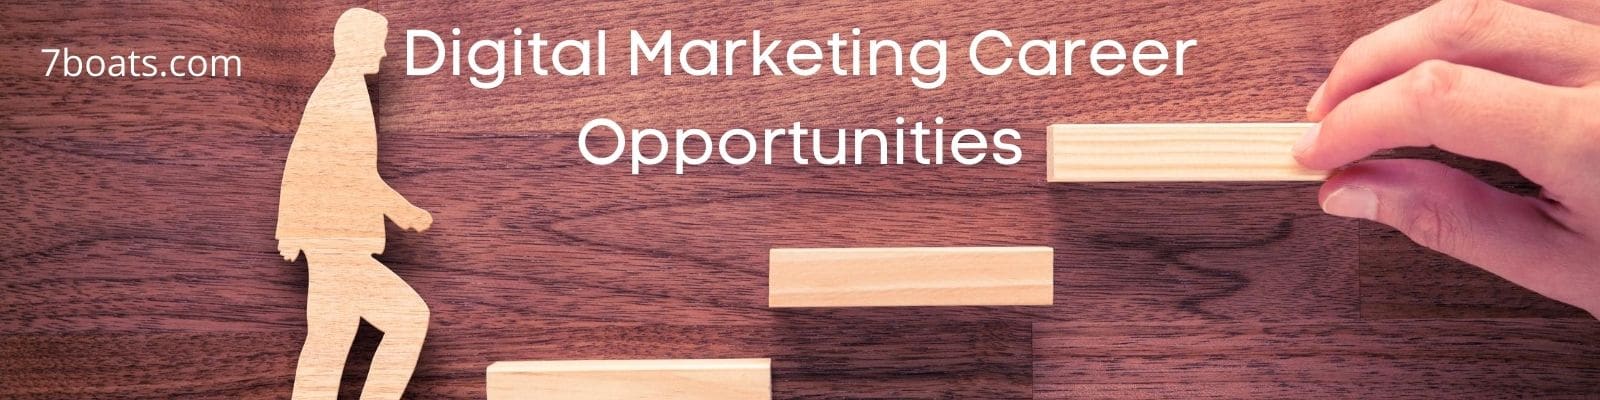 Ultimate Guide to Digital Marketing Jobs and Career Opportunities – Digital Marketing Career Scope in India